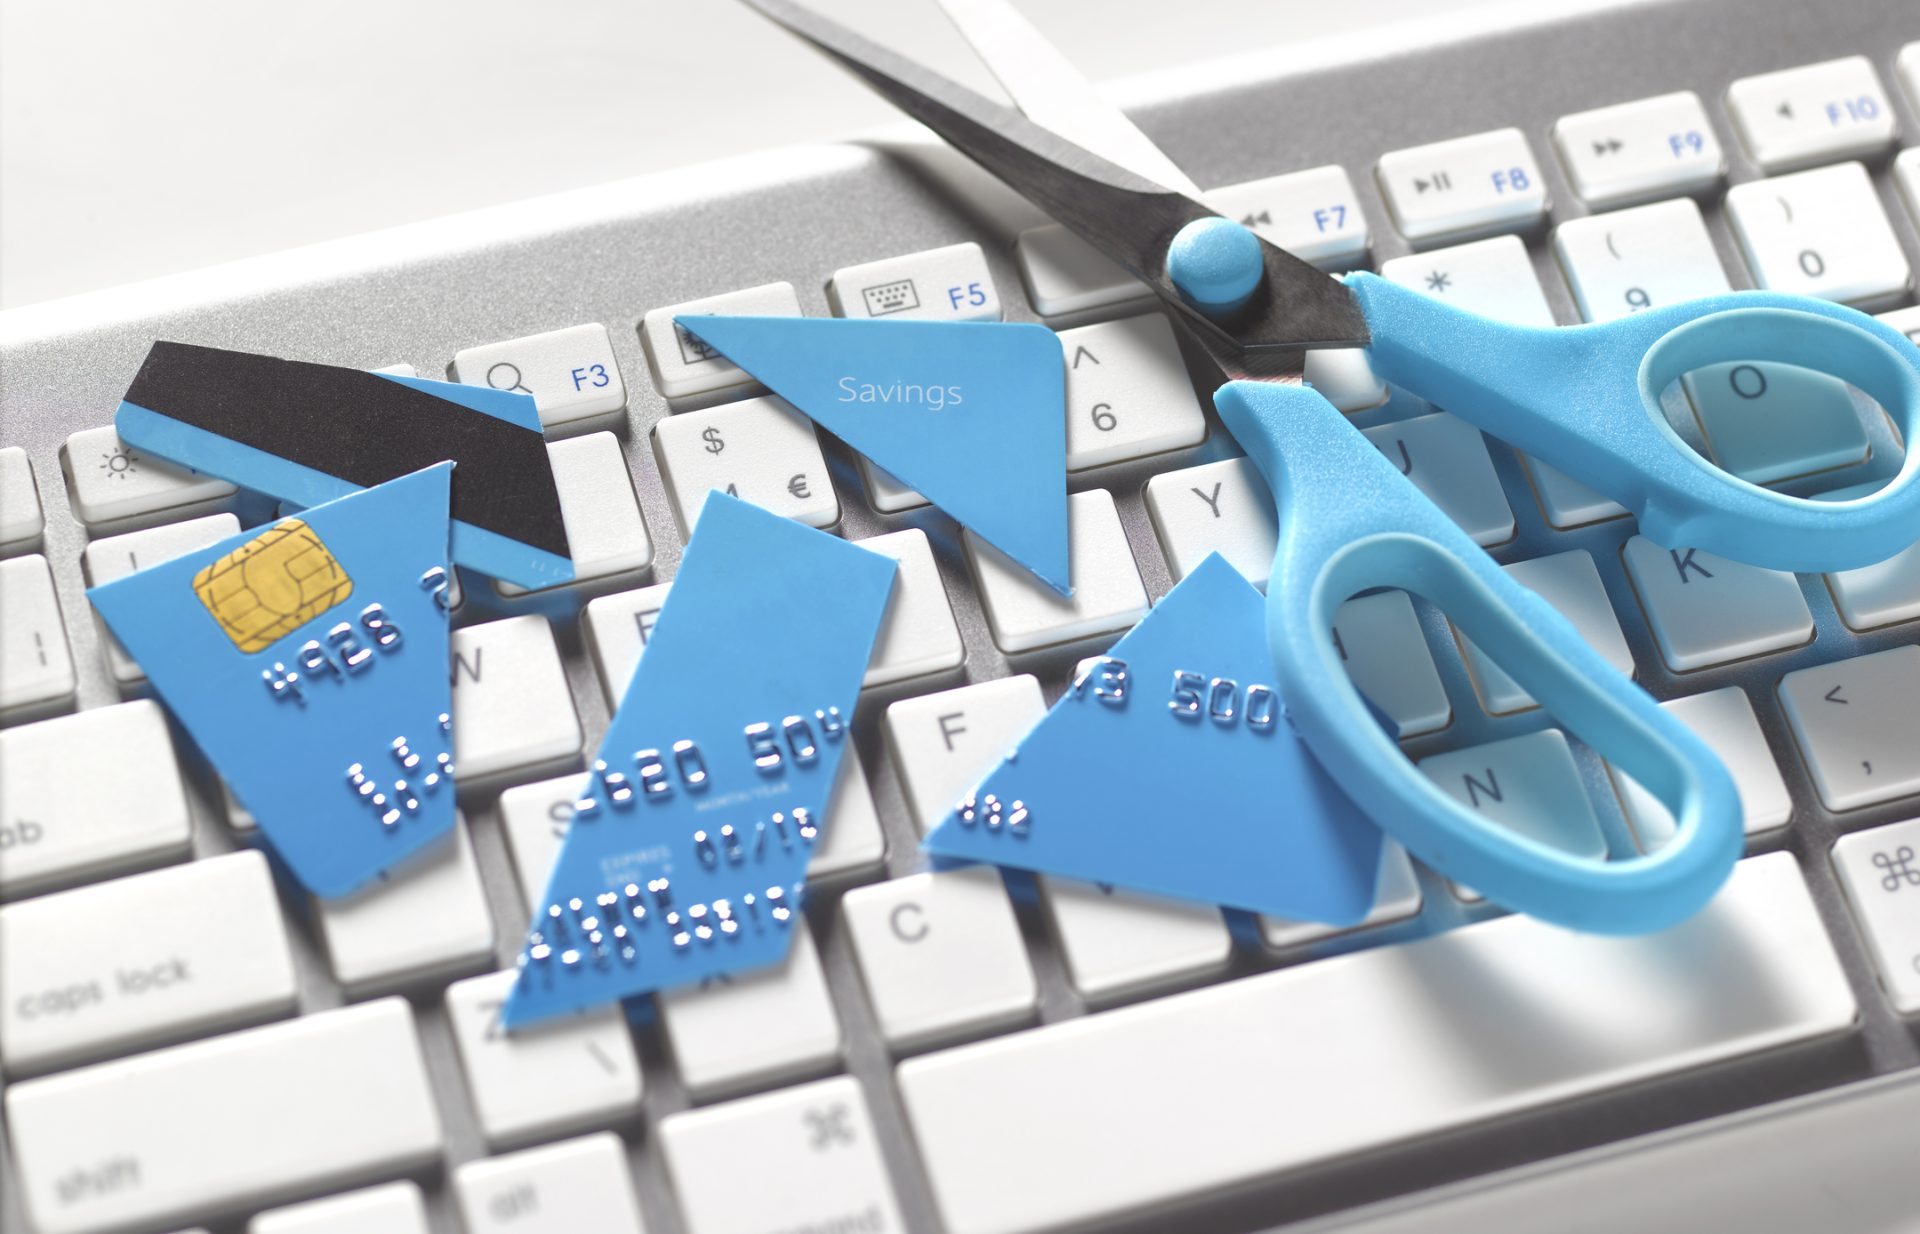 SCISSORS AND CUT UP CREDIT CARD, TO PREVENT OVERSPENDING ONLINE